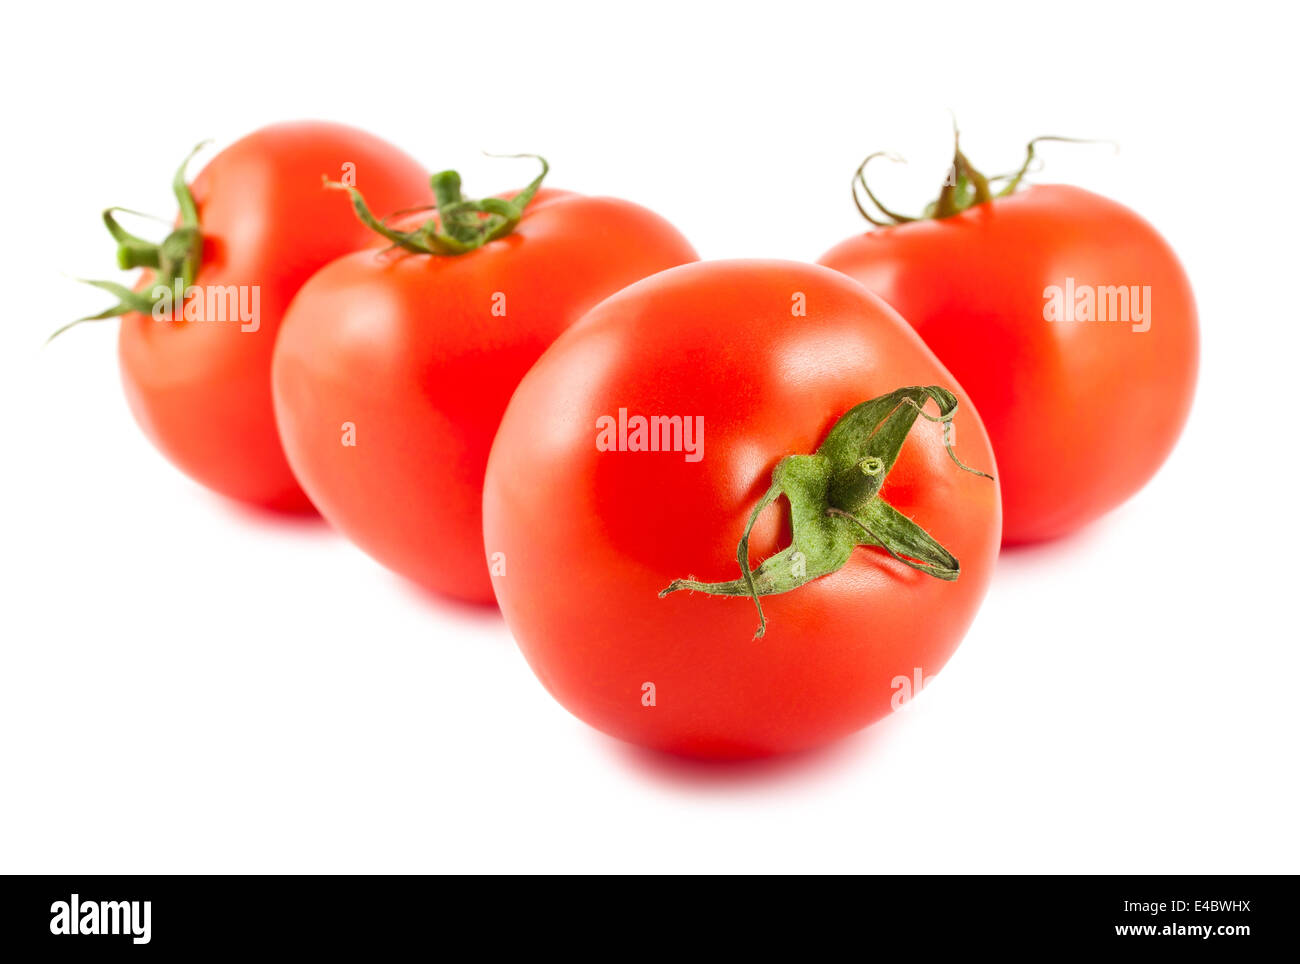 Red ripe tomatoes Stock Photo